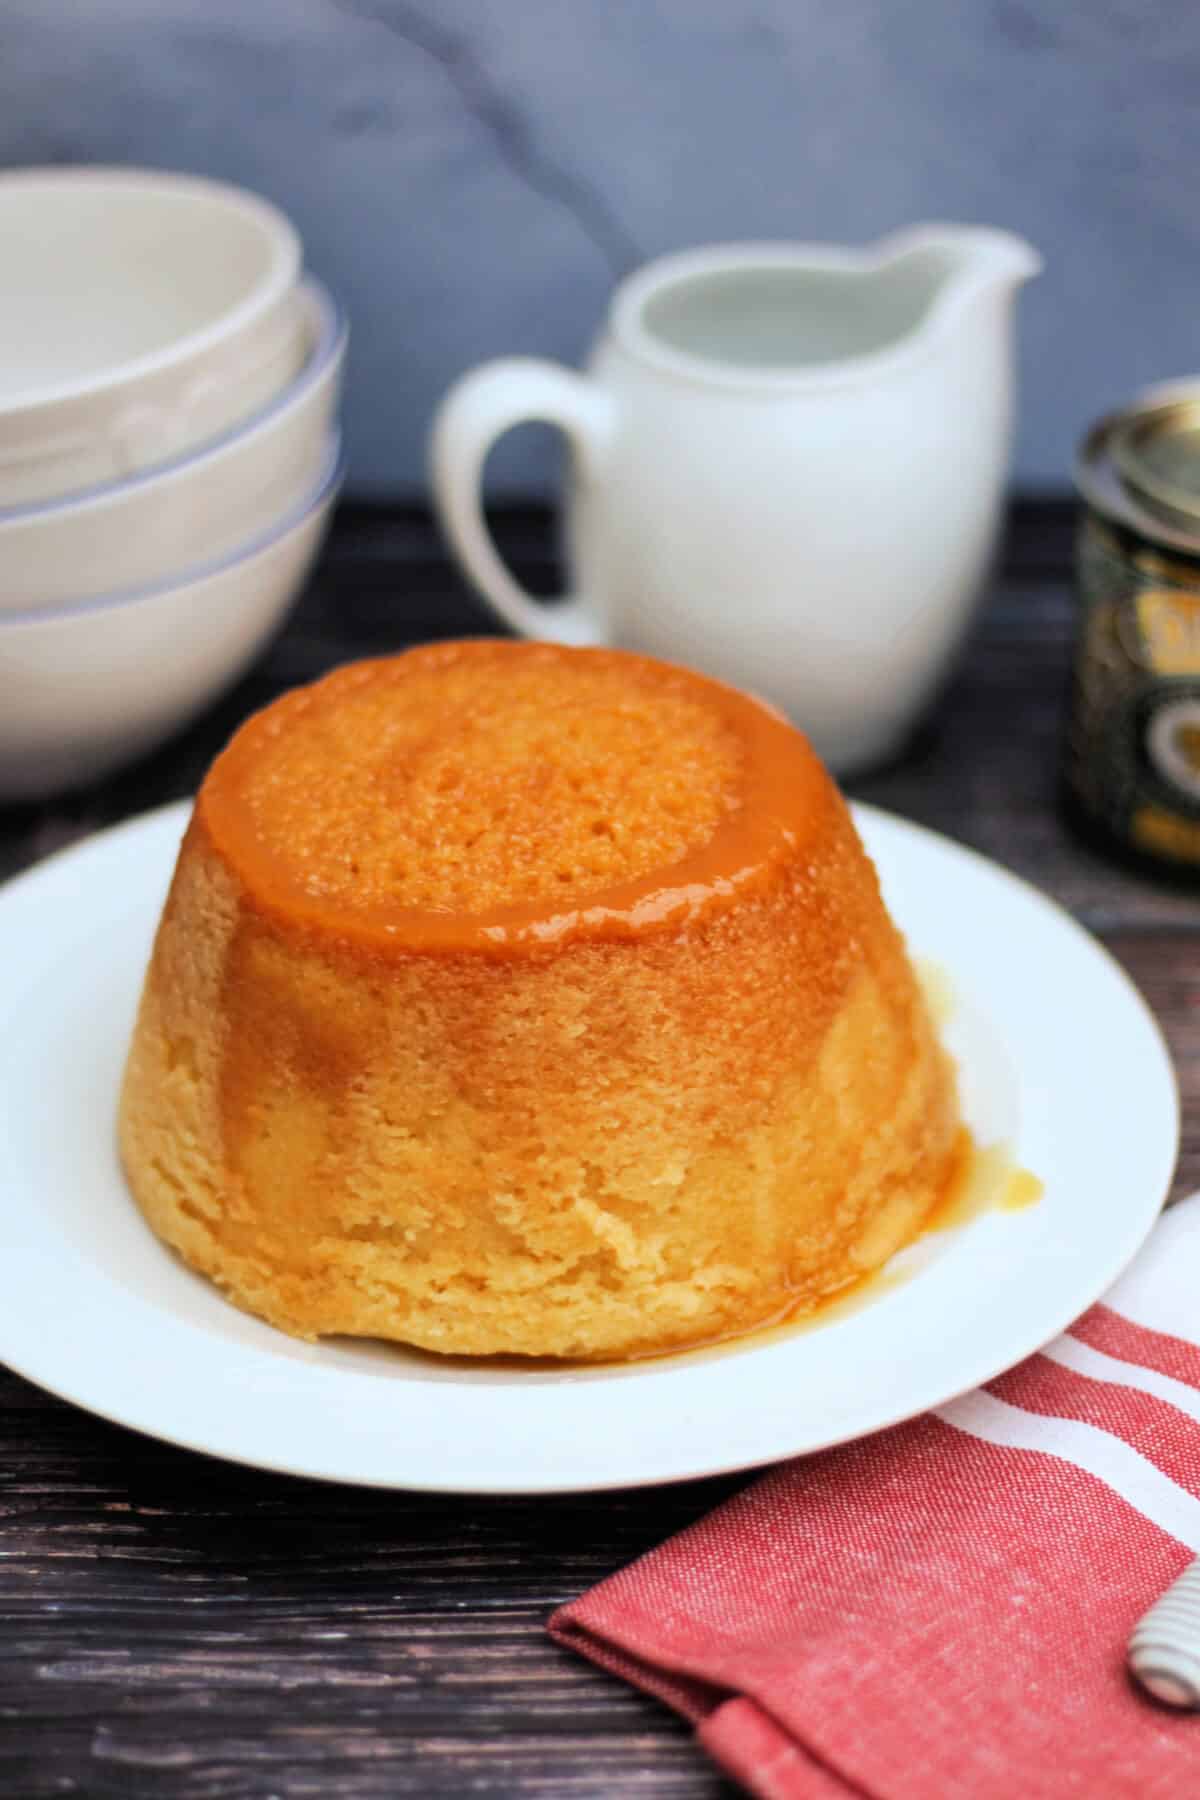 Treacle sponge pudding on a white serving plate, jug of custard and bowls behind.